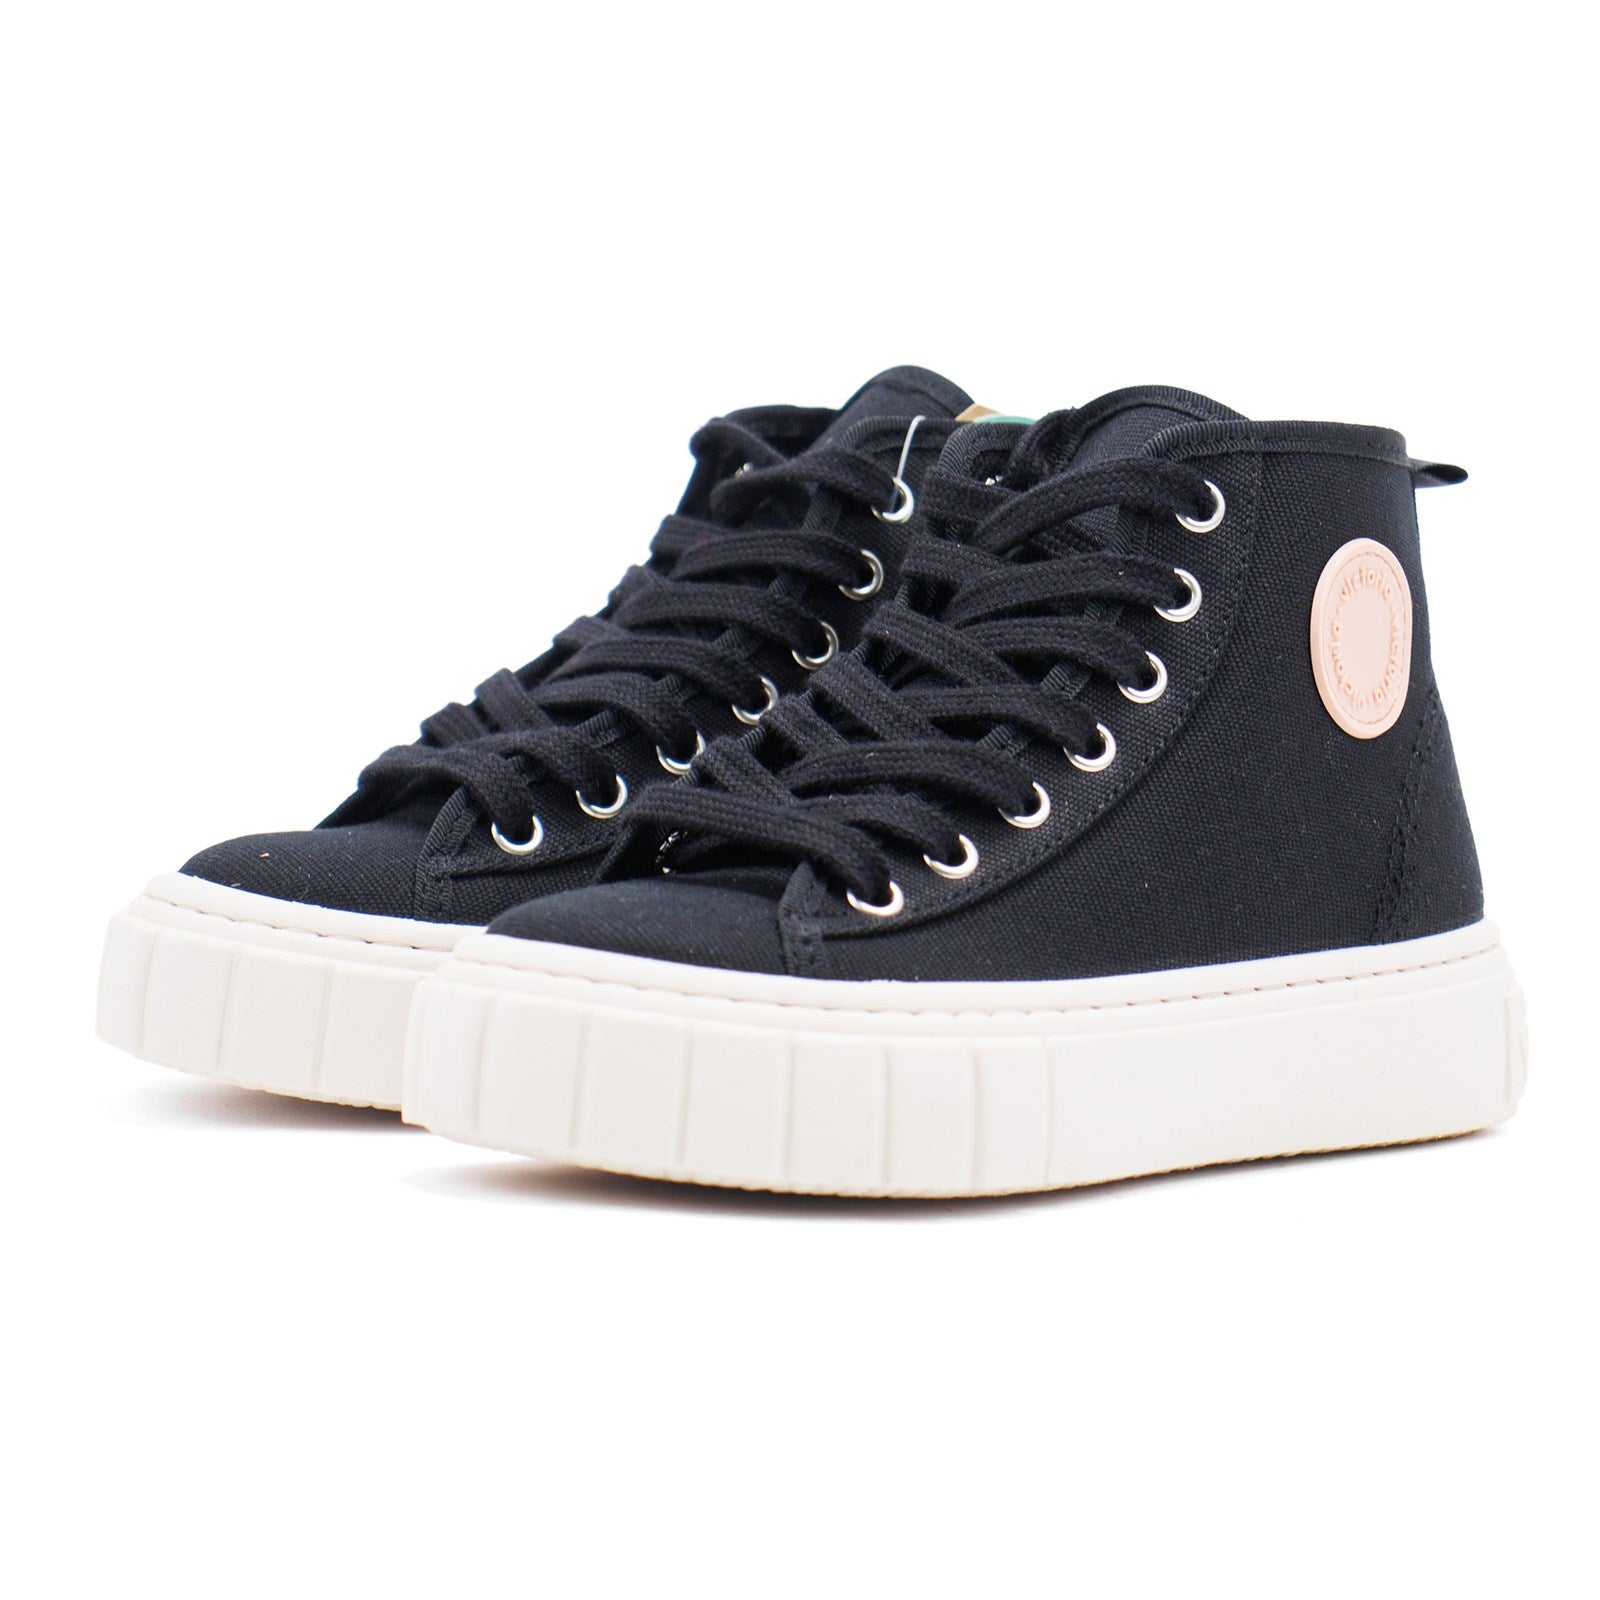 Victoria Girl Abril High Top Platform Sneakers